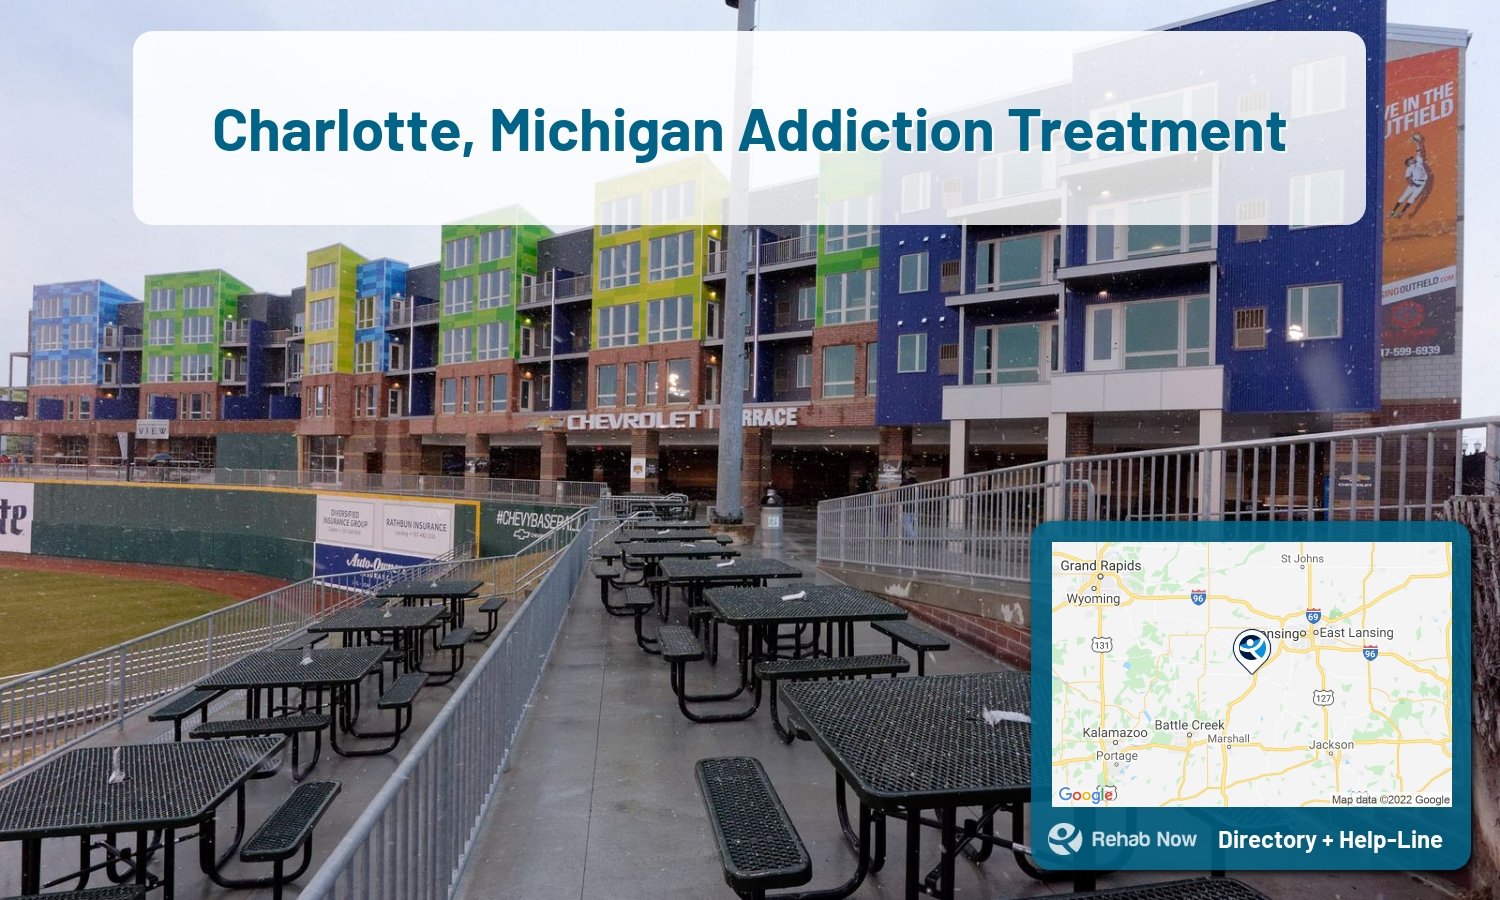 Drug rehab and alcohol treatment services nearby Charlotte, MI. Need help choosing a treatment program? Call our free hotline!